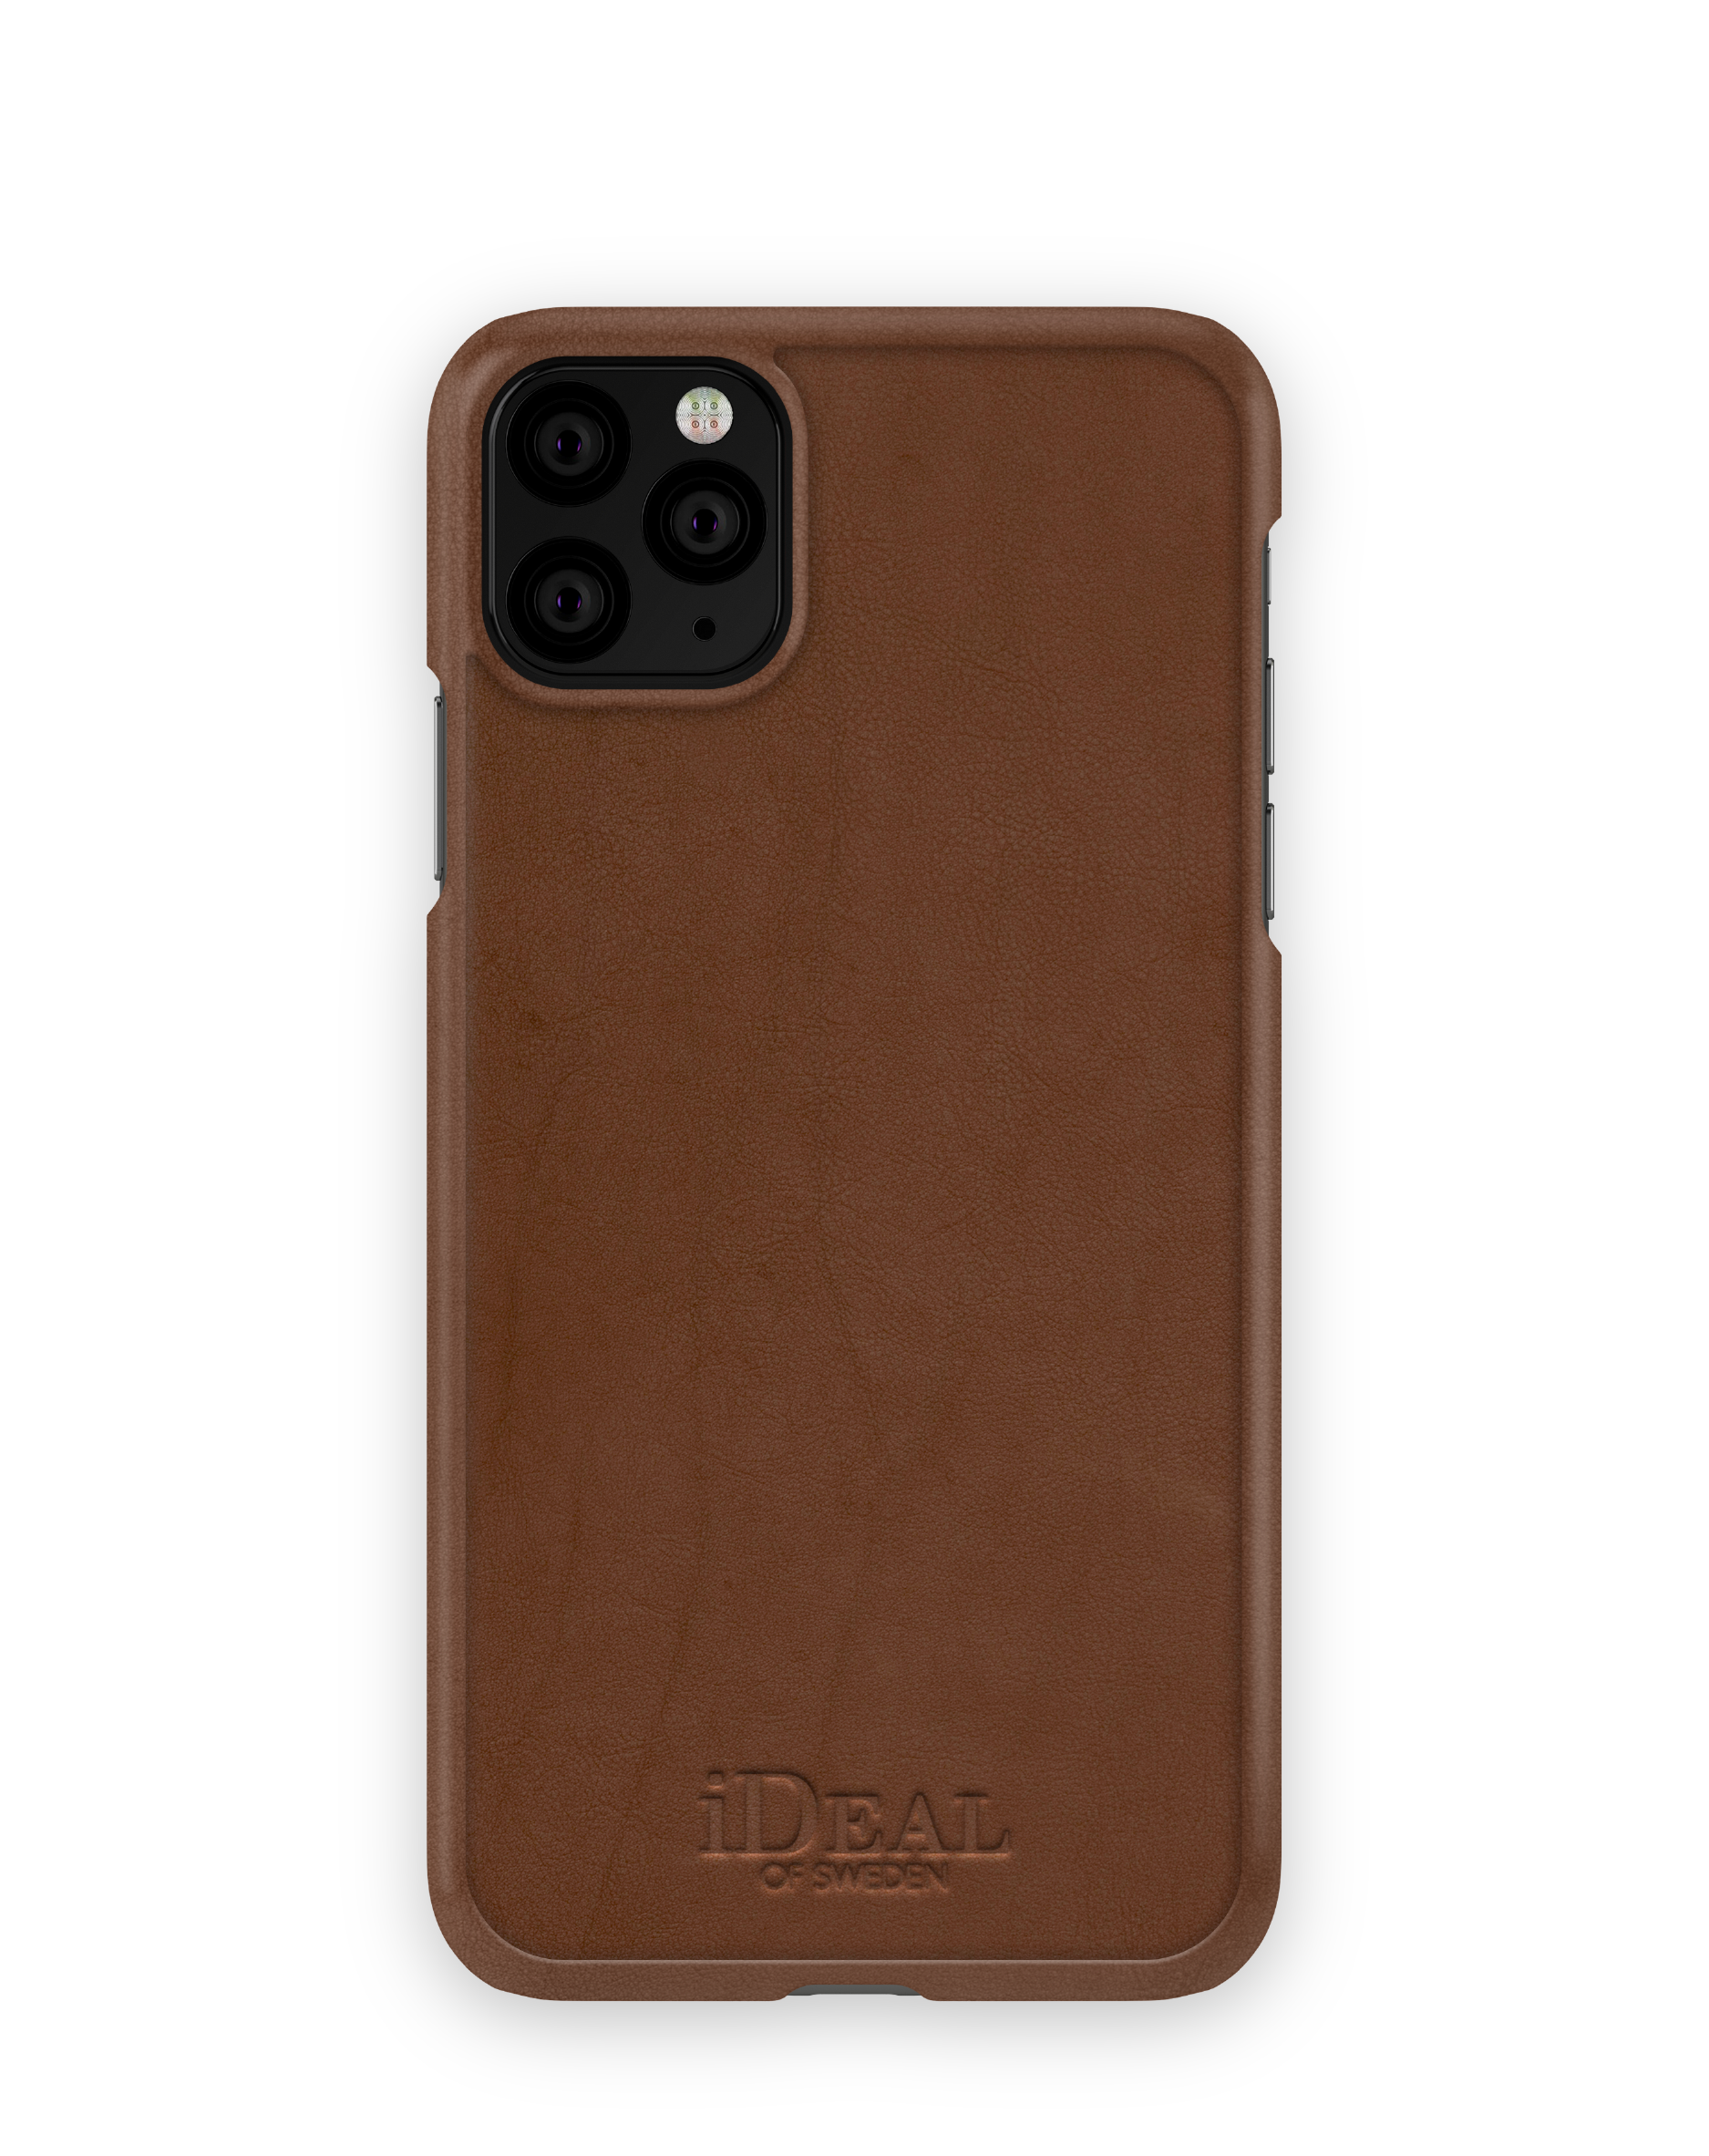 11 IDEAL iPhone XS Apple Brown iPhone Backcover, Max, Max, Apple Apple, SWEDEN OF IDFC-I1965-COM-03, Pro